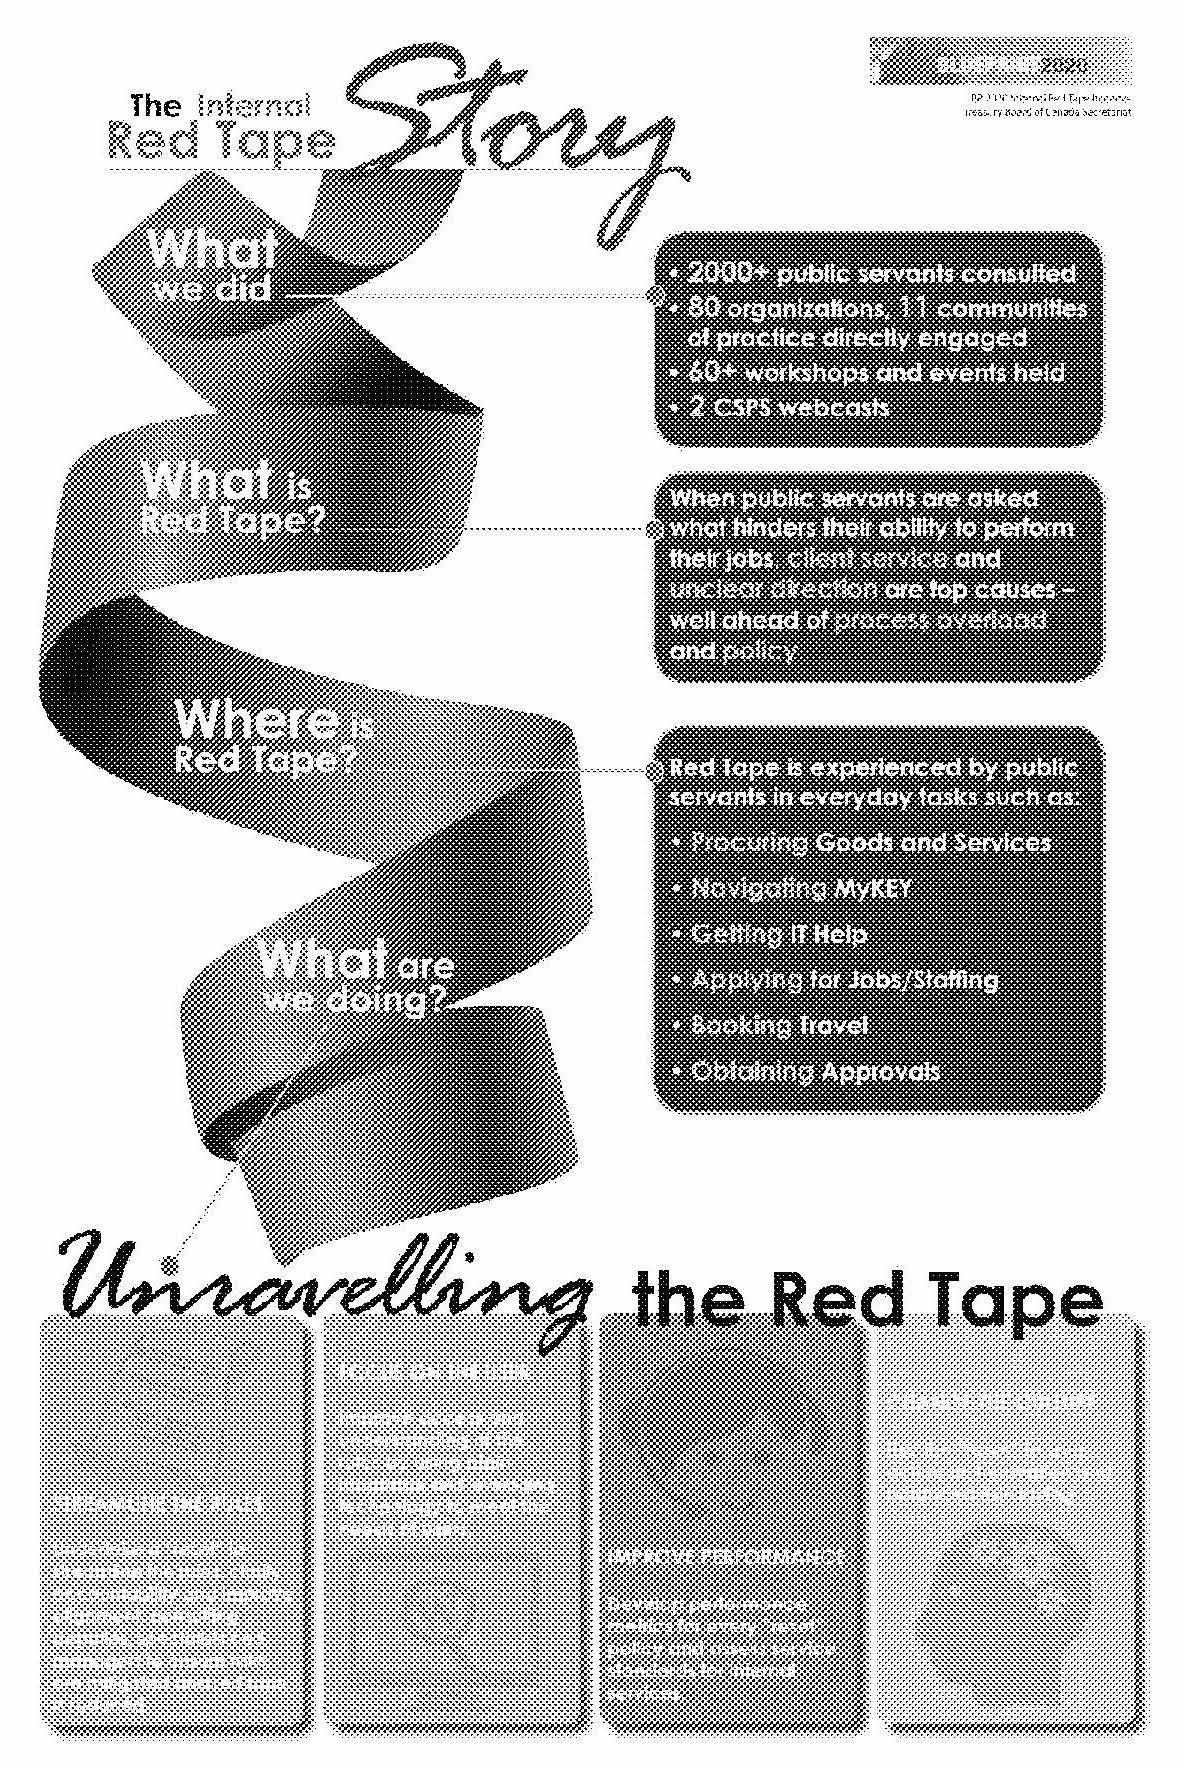 The Internal Red Tape Story, describing what we did (2000+ public servants consulted), what is red tape (things that hinder the ability of public servants to perform their jobs), where is red tape (in everyday tasks such as procuring goods and services, navigating MyKEY, getting IT help, and more), and what are we doing (streamlining the rules, focusing on the user, improving performance, and changing the culture).